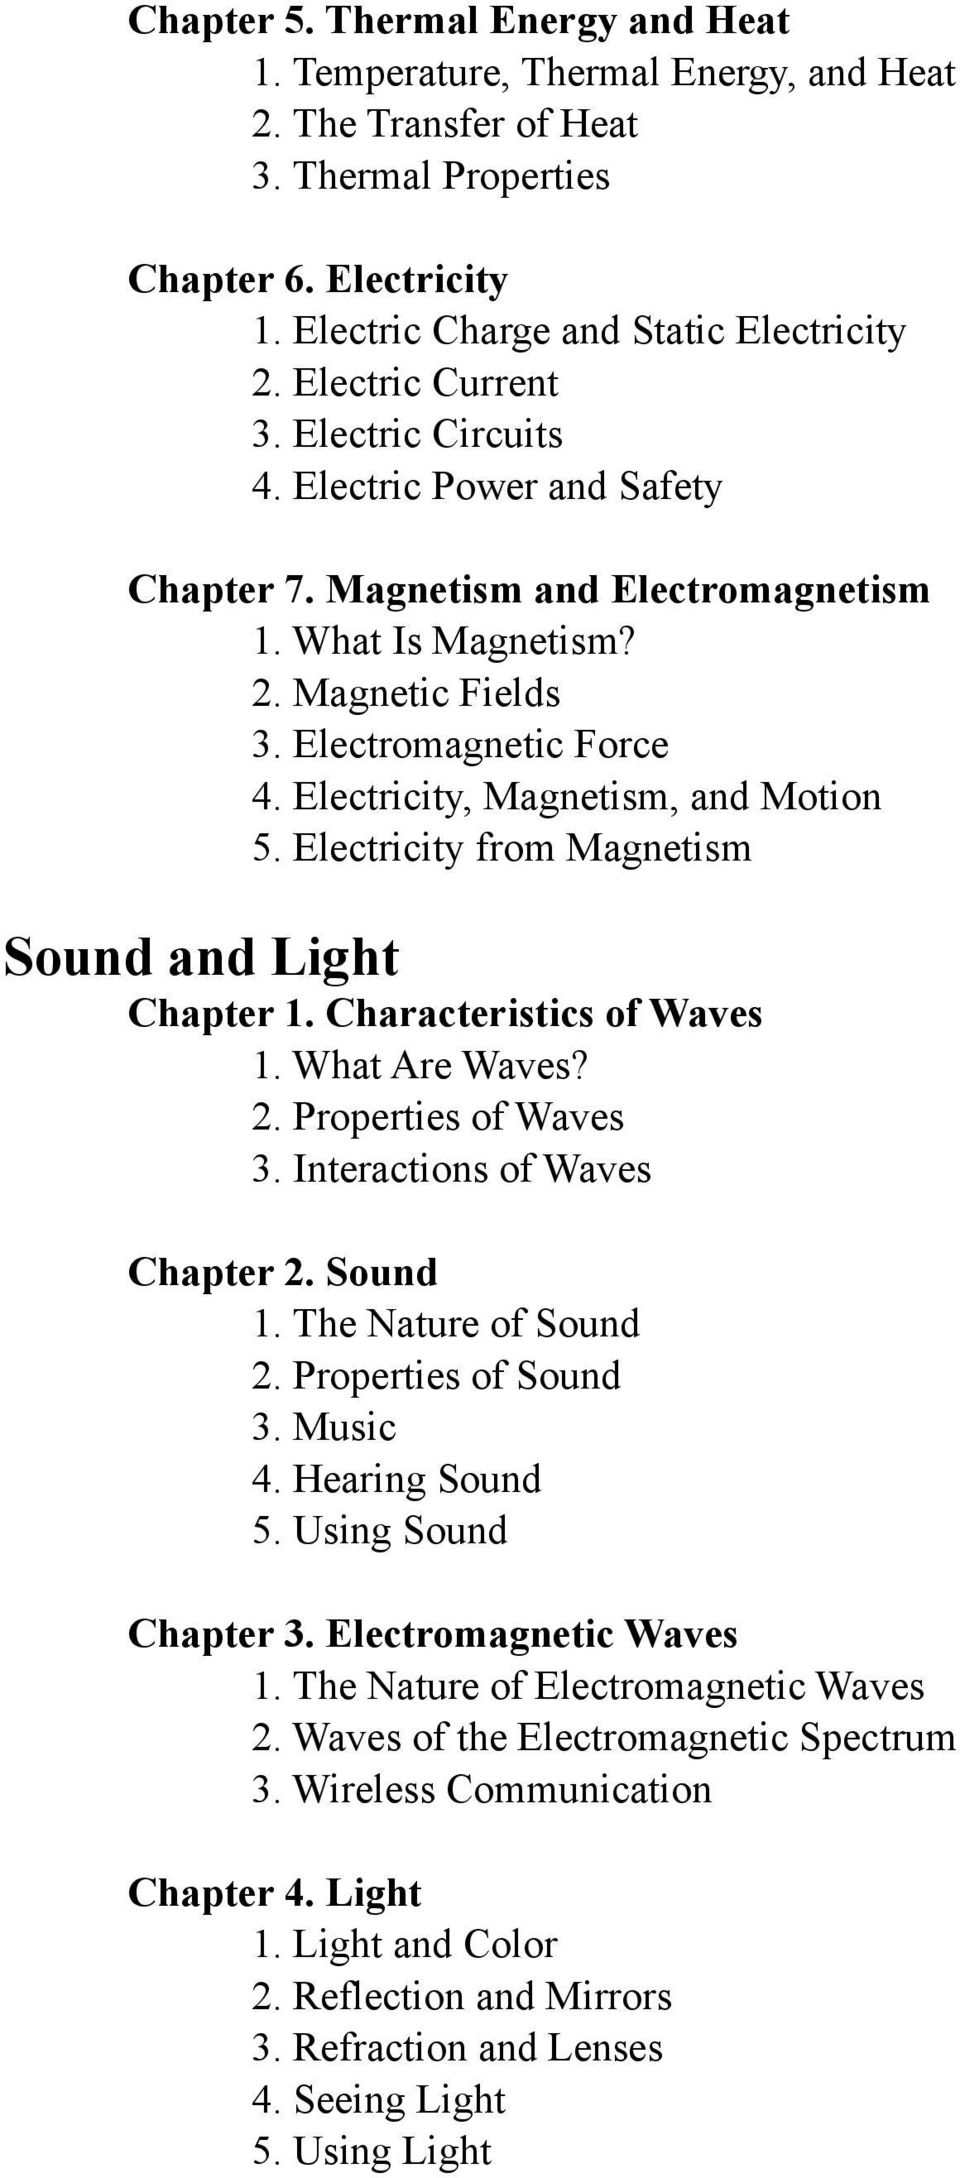 Electricity, Magnetism, and Motion 5. Electricity from Magnetism Sound and Light Chapter 1. Characteristics of Waves 1. What Are Waves? 2. Properties of Waves 3. Interactions of Waves Chapter 2.